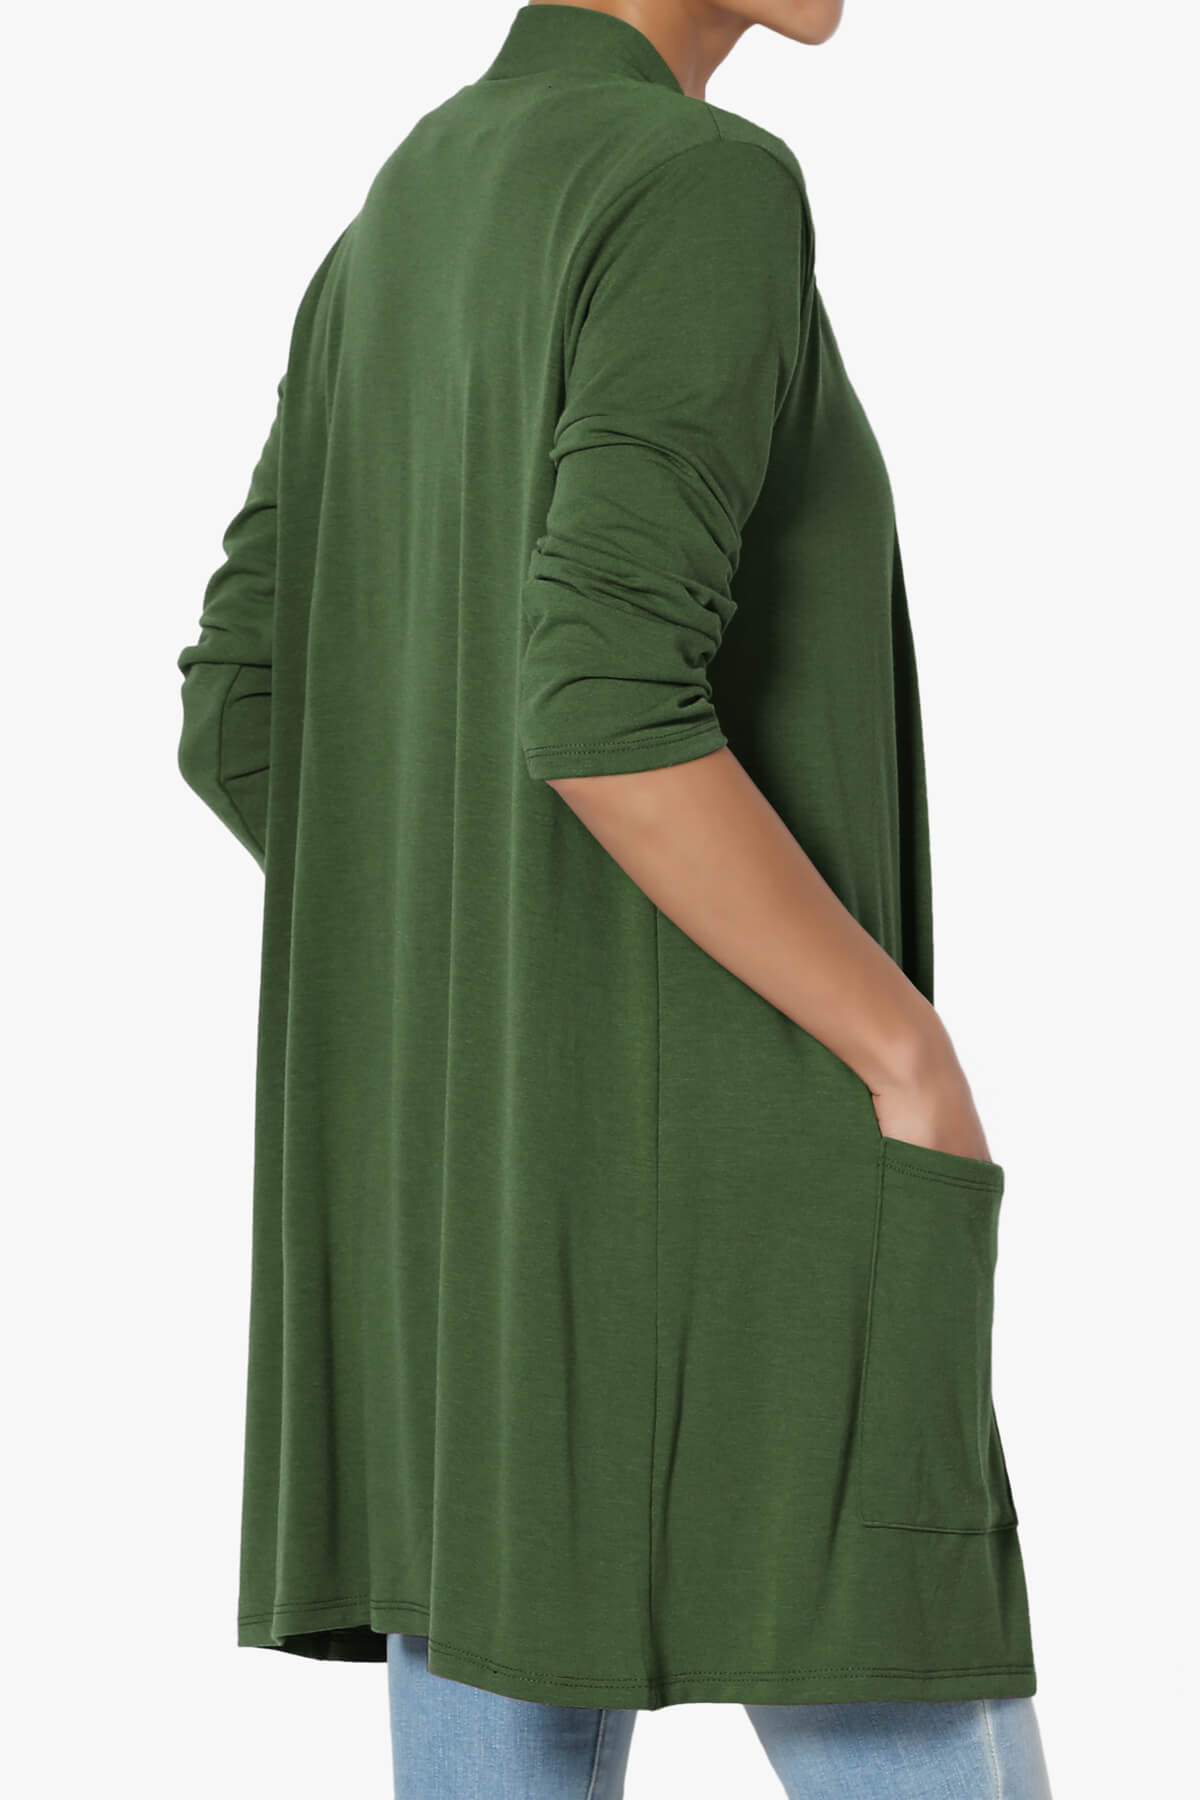 Load image into Gallery viewer, Daday Slouchy Pocket 3/4 Sleeve Cardigan ARMY GREEN_4
